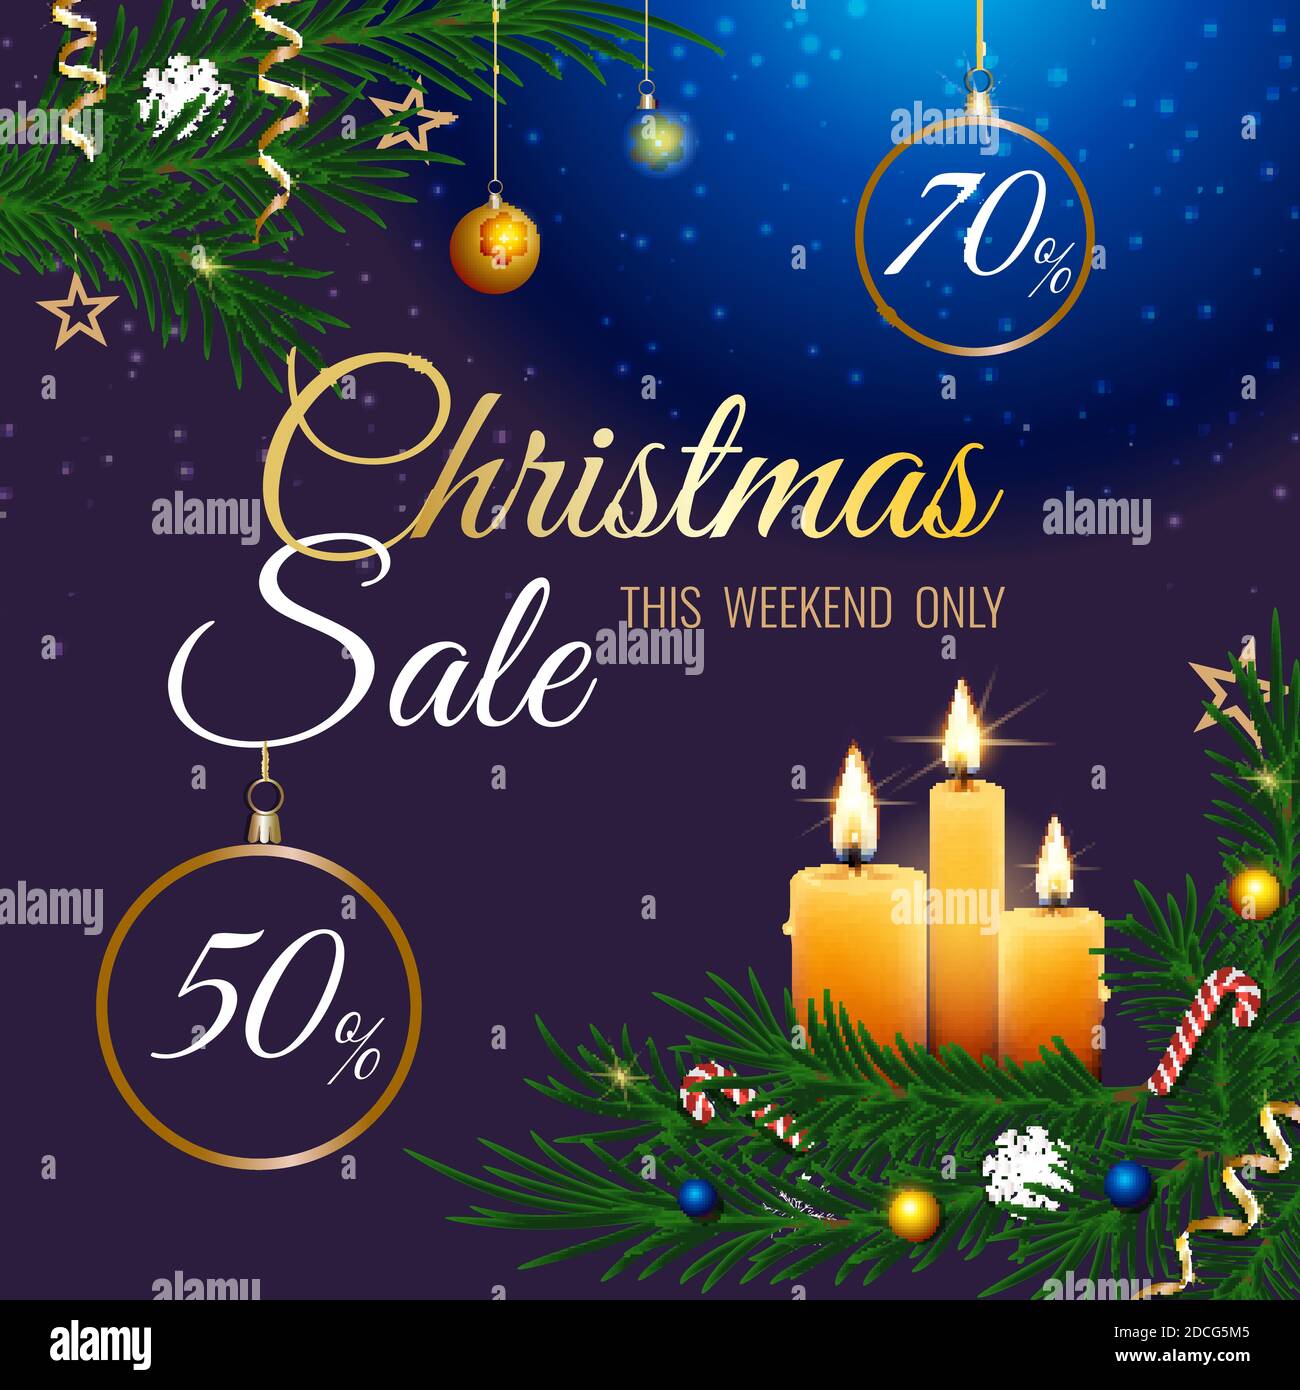 Merry Christmas and Happy New Year Sale banner vector illustration. Stock Vector